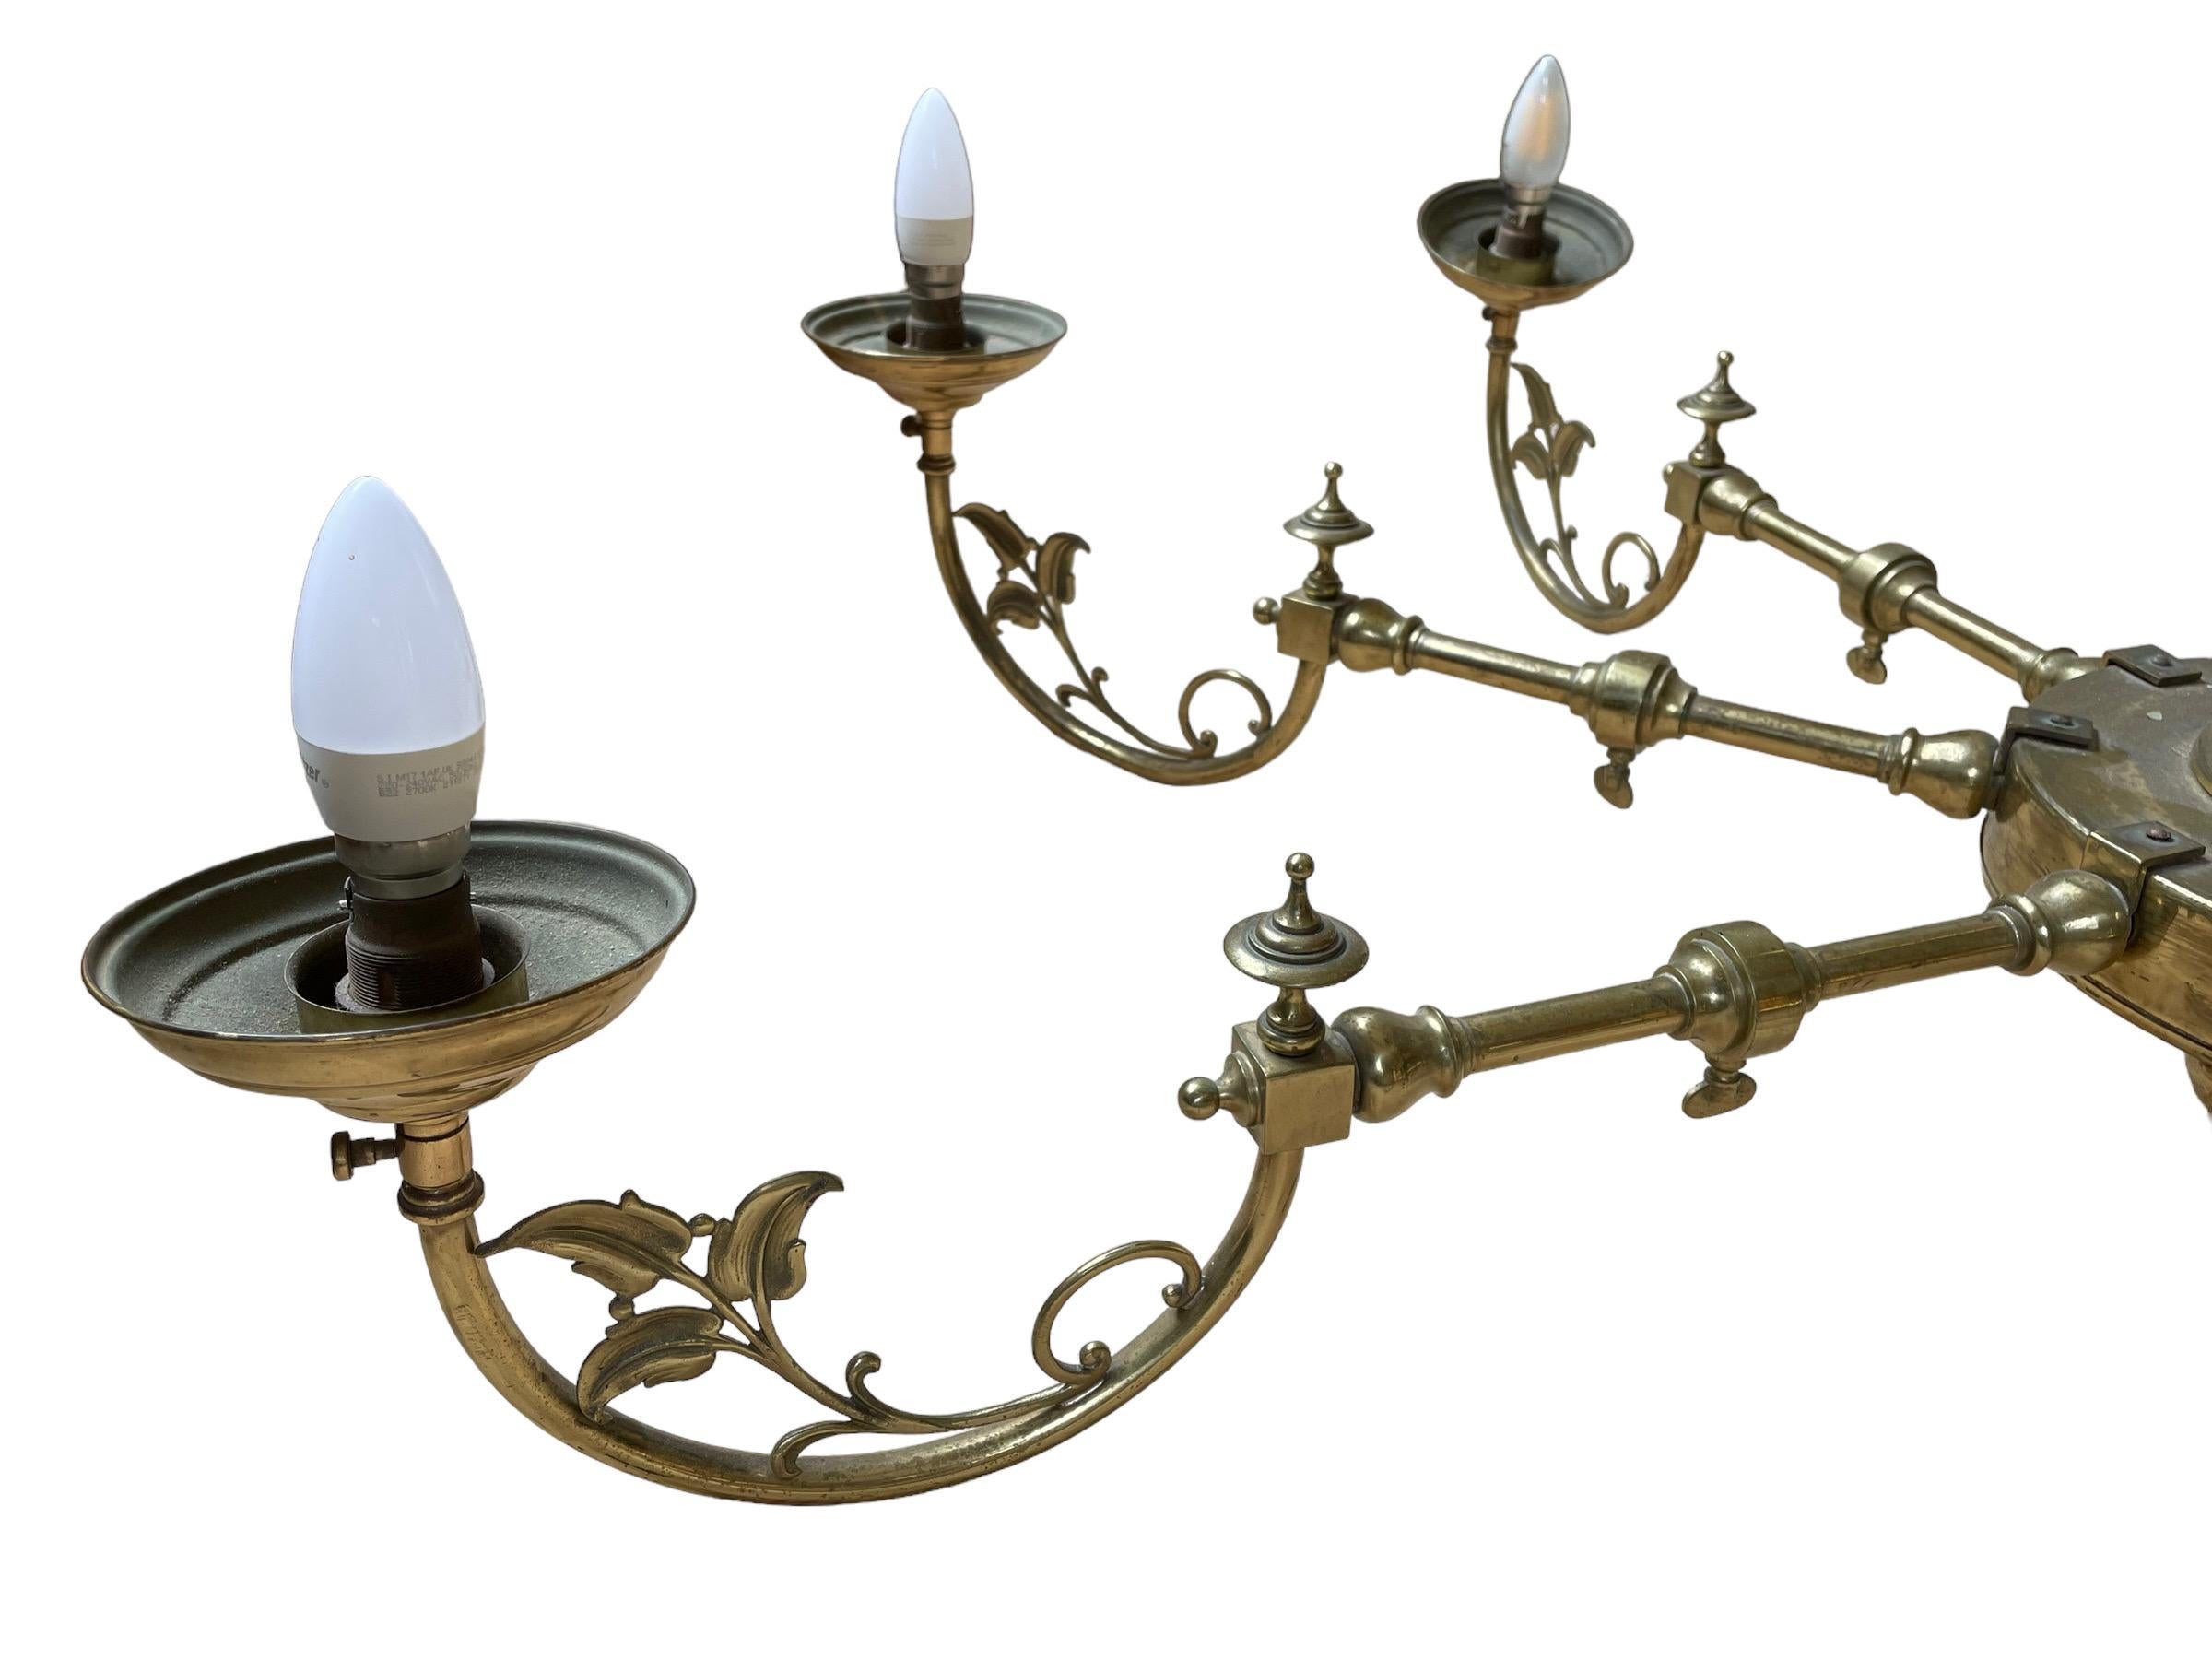 Liberty Style Chandelier Center Light

Made around the turn of the century incorporating Classical style with Art Nouveau influences, the eight branch arms centered with a substantial central boss.

Liberty style detailing with leaf feature 
Ideal